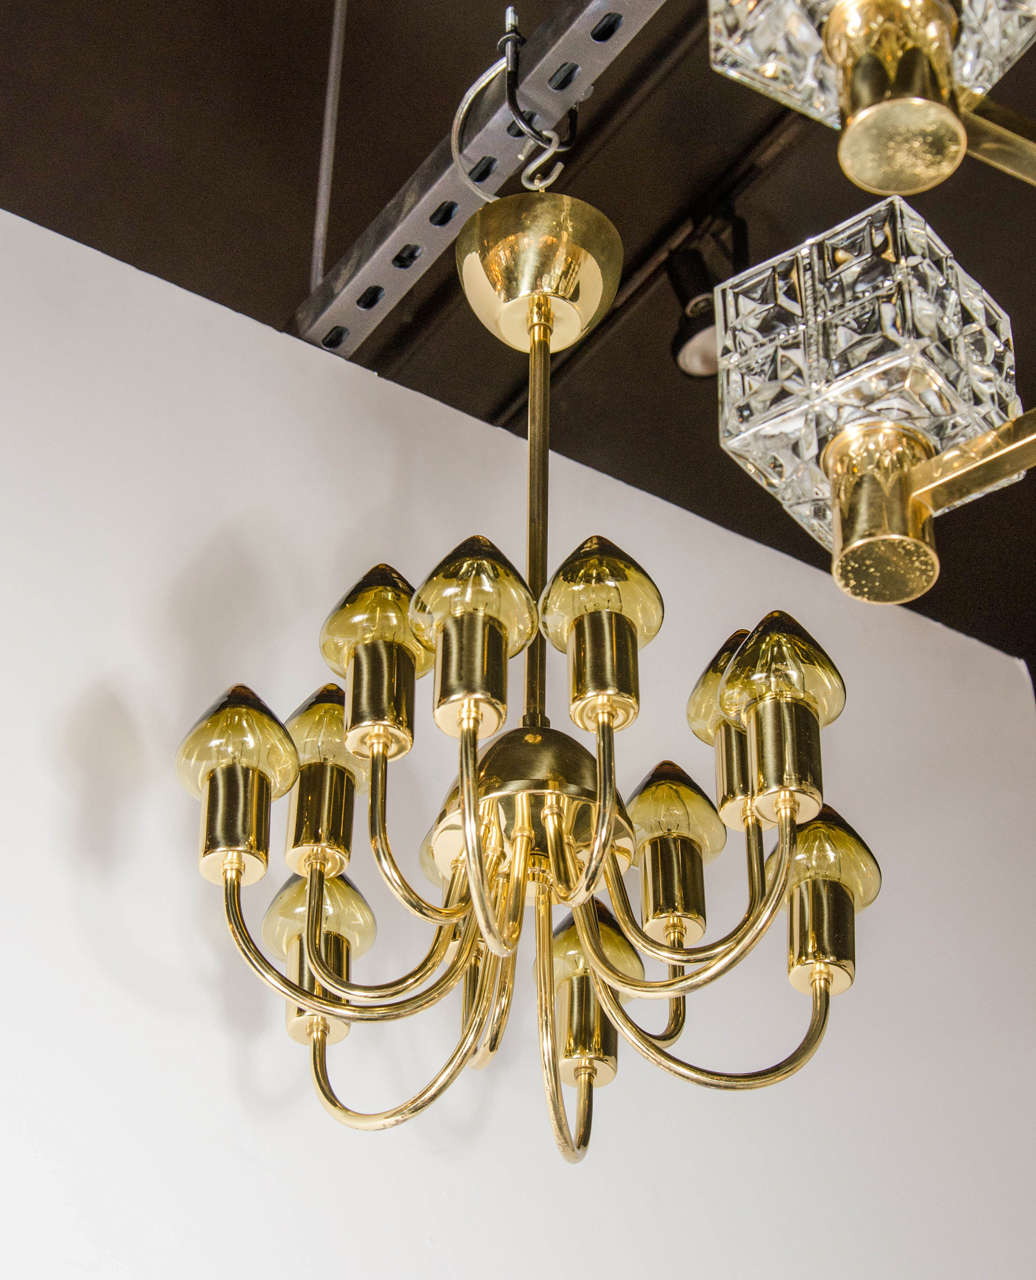 This refined Scandinavian Mid-Century Modern chandelier was realized circa 1960 by the celebrated Swedish designer Hans Agne Jakobsson. Active between 1950 and roughly 1970- often considered the 